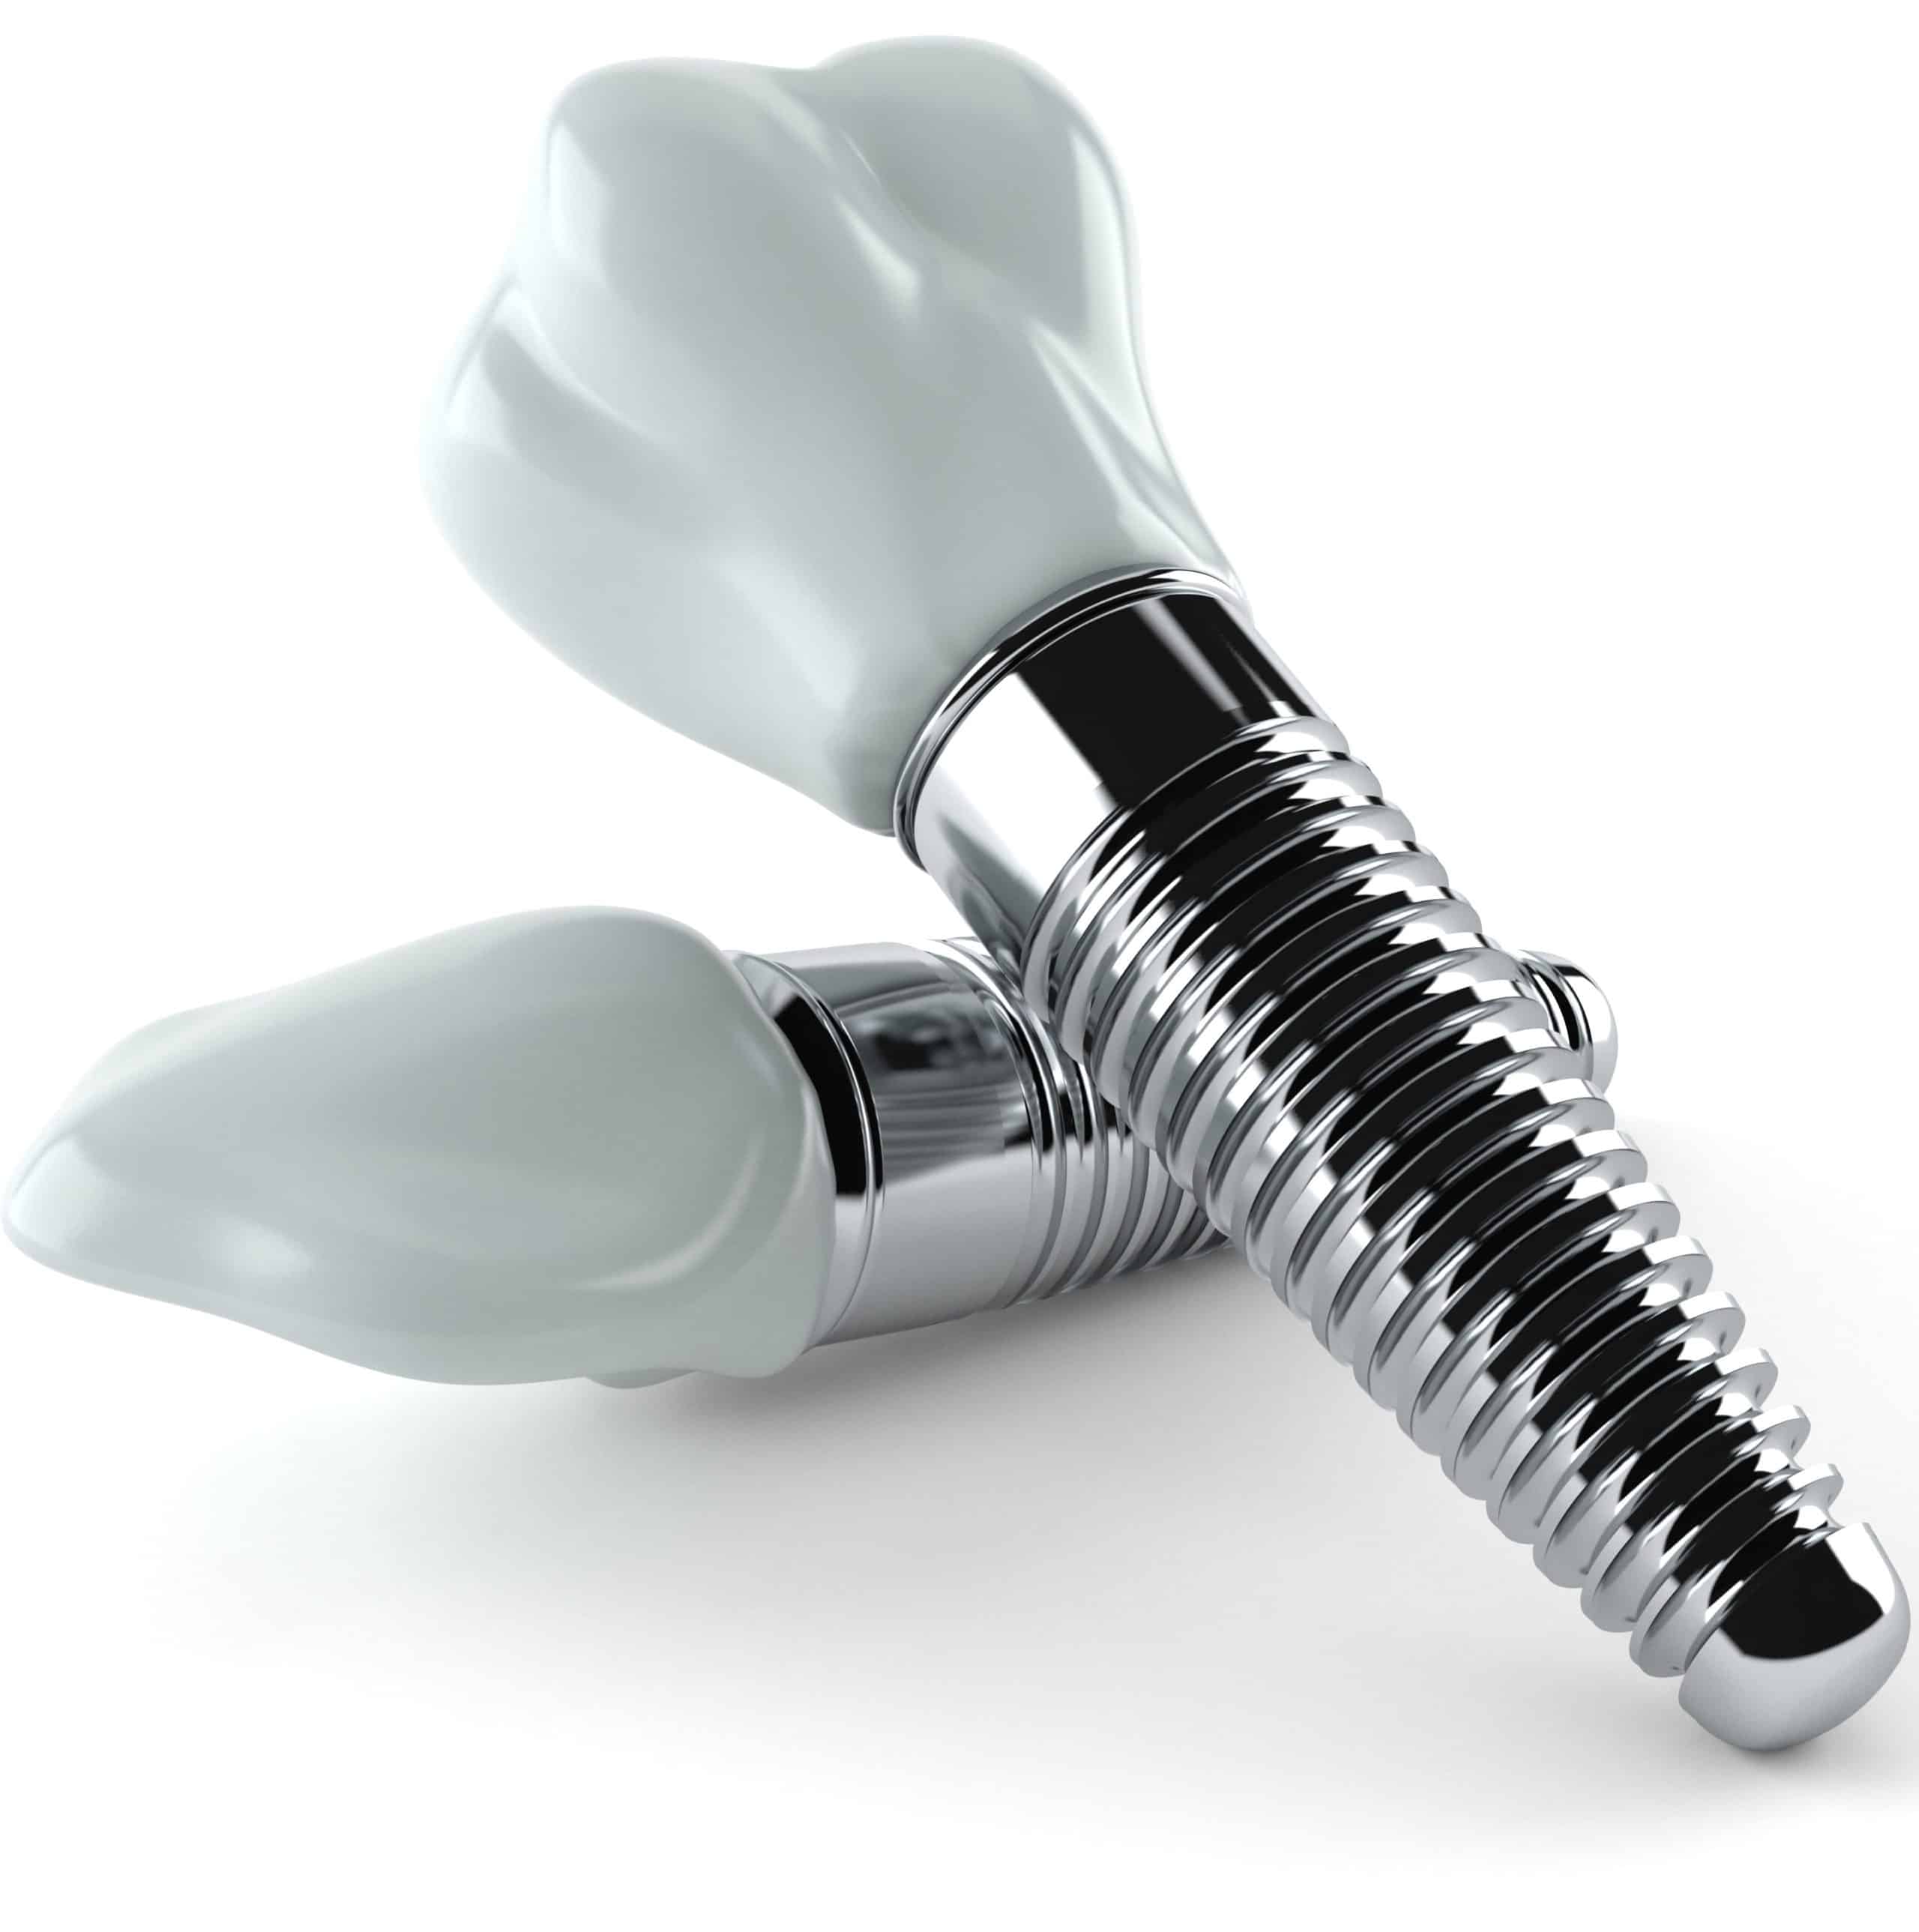 Dental implants waiting to be fitted to a North Vancouver patient